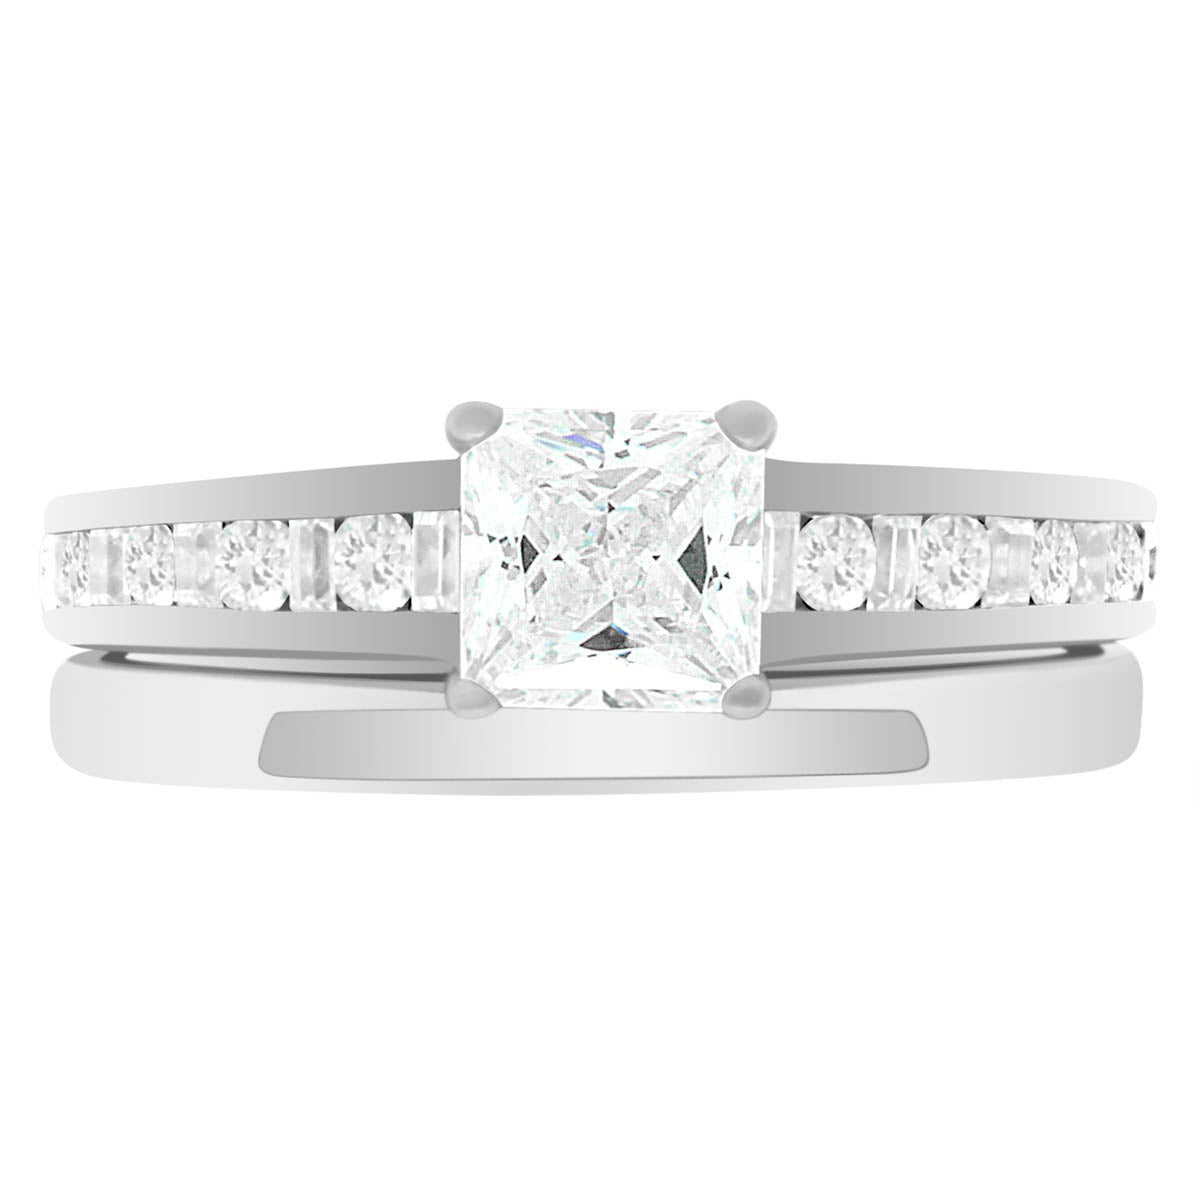 Fancy Cut Diamond Ring made from white gold with a plain wedding ring